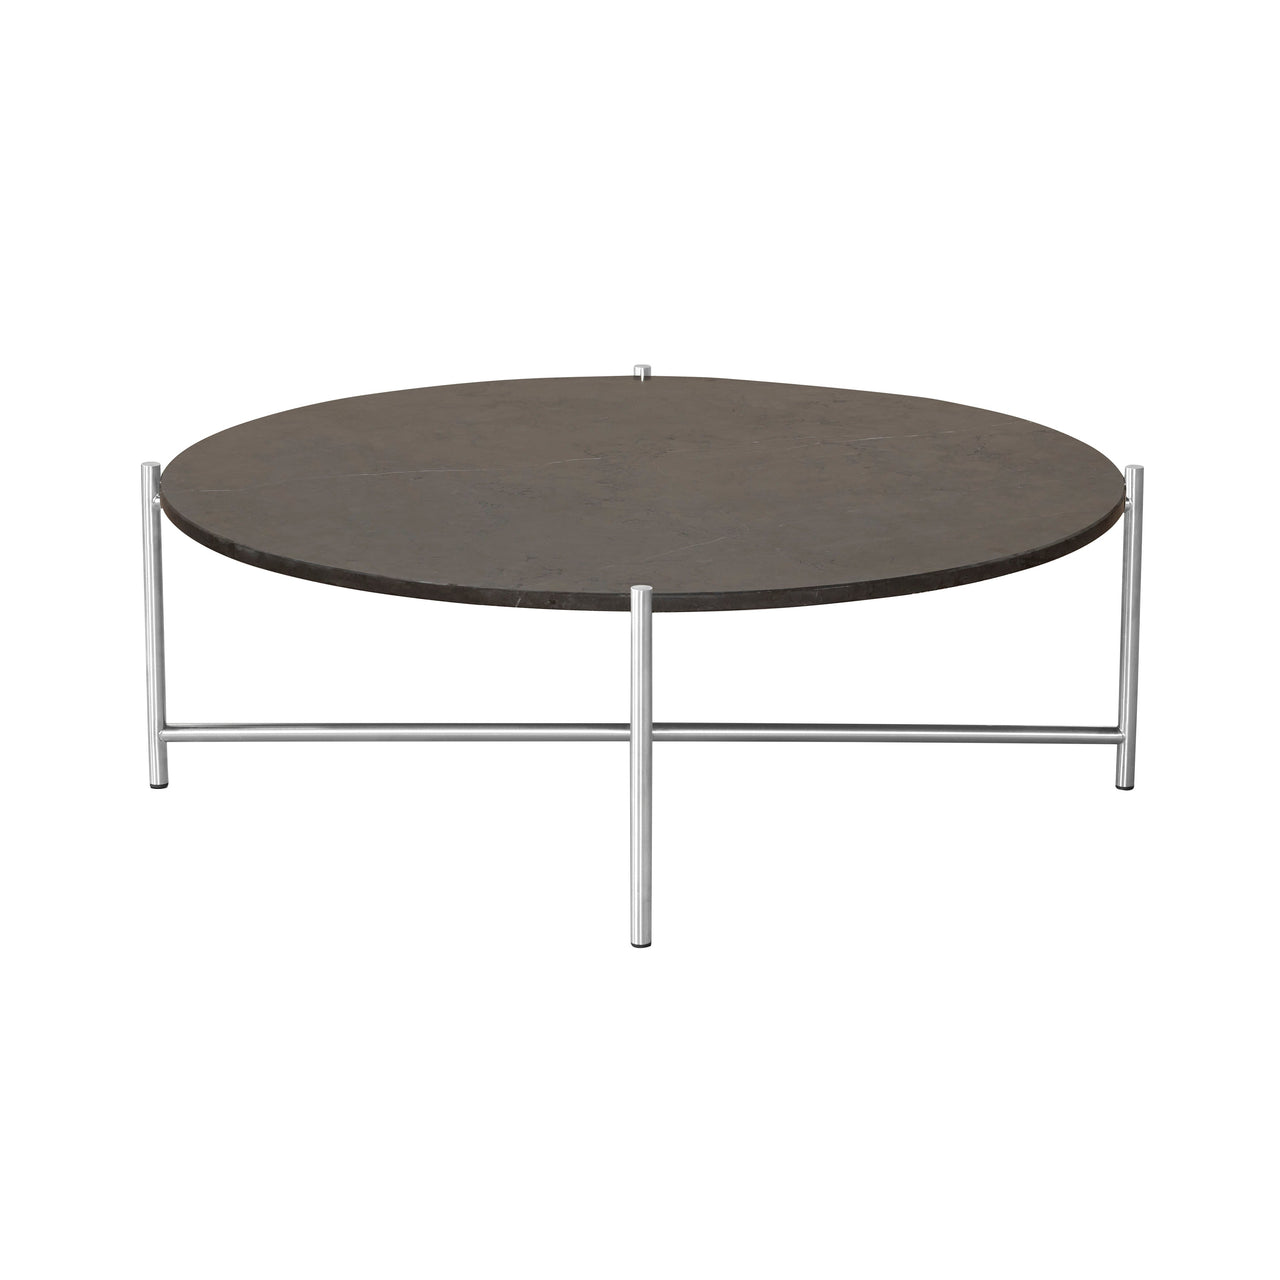 Round Coffee Table: Large - 37.8